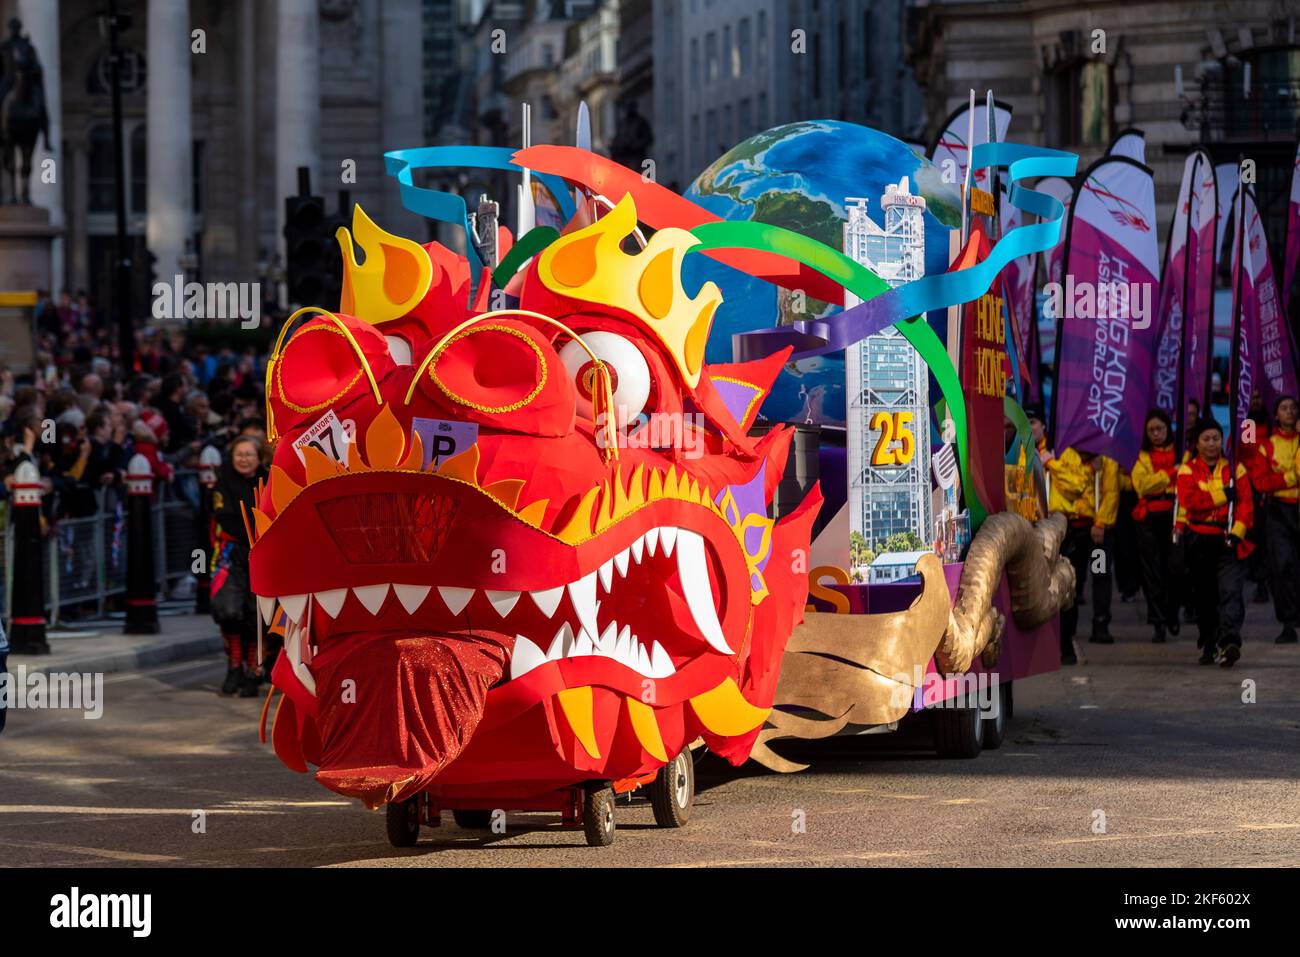 Hong Kong Economic and Trade Office dragon dancers at the Lord Mayor's Show parade in the City of London, UK. Dragon puppet Stock Photo